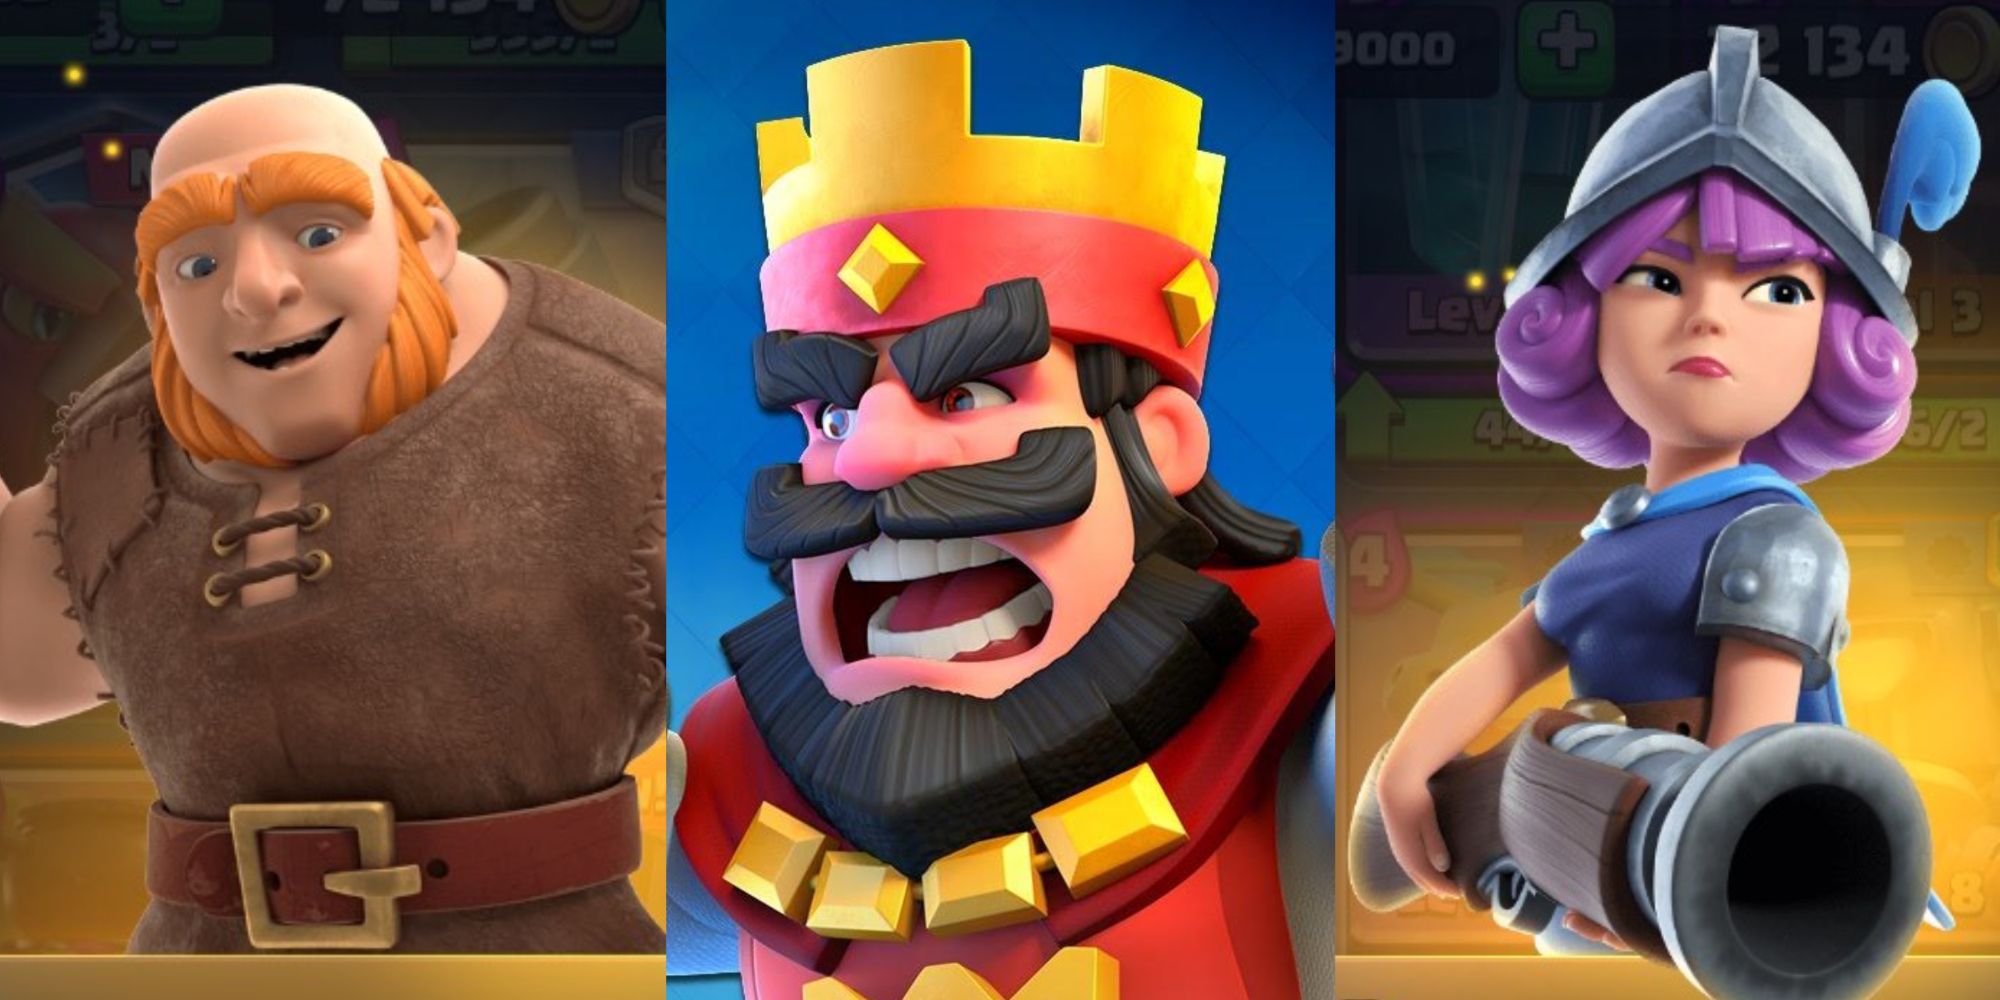 Clash Royale Rare Card Collage Featuring Giant, the King, and Musketeer